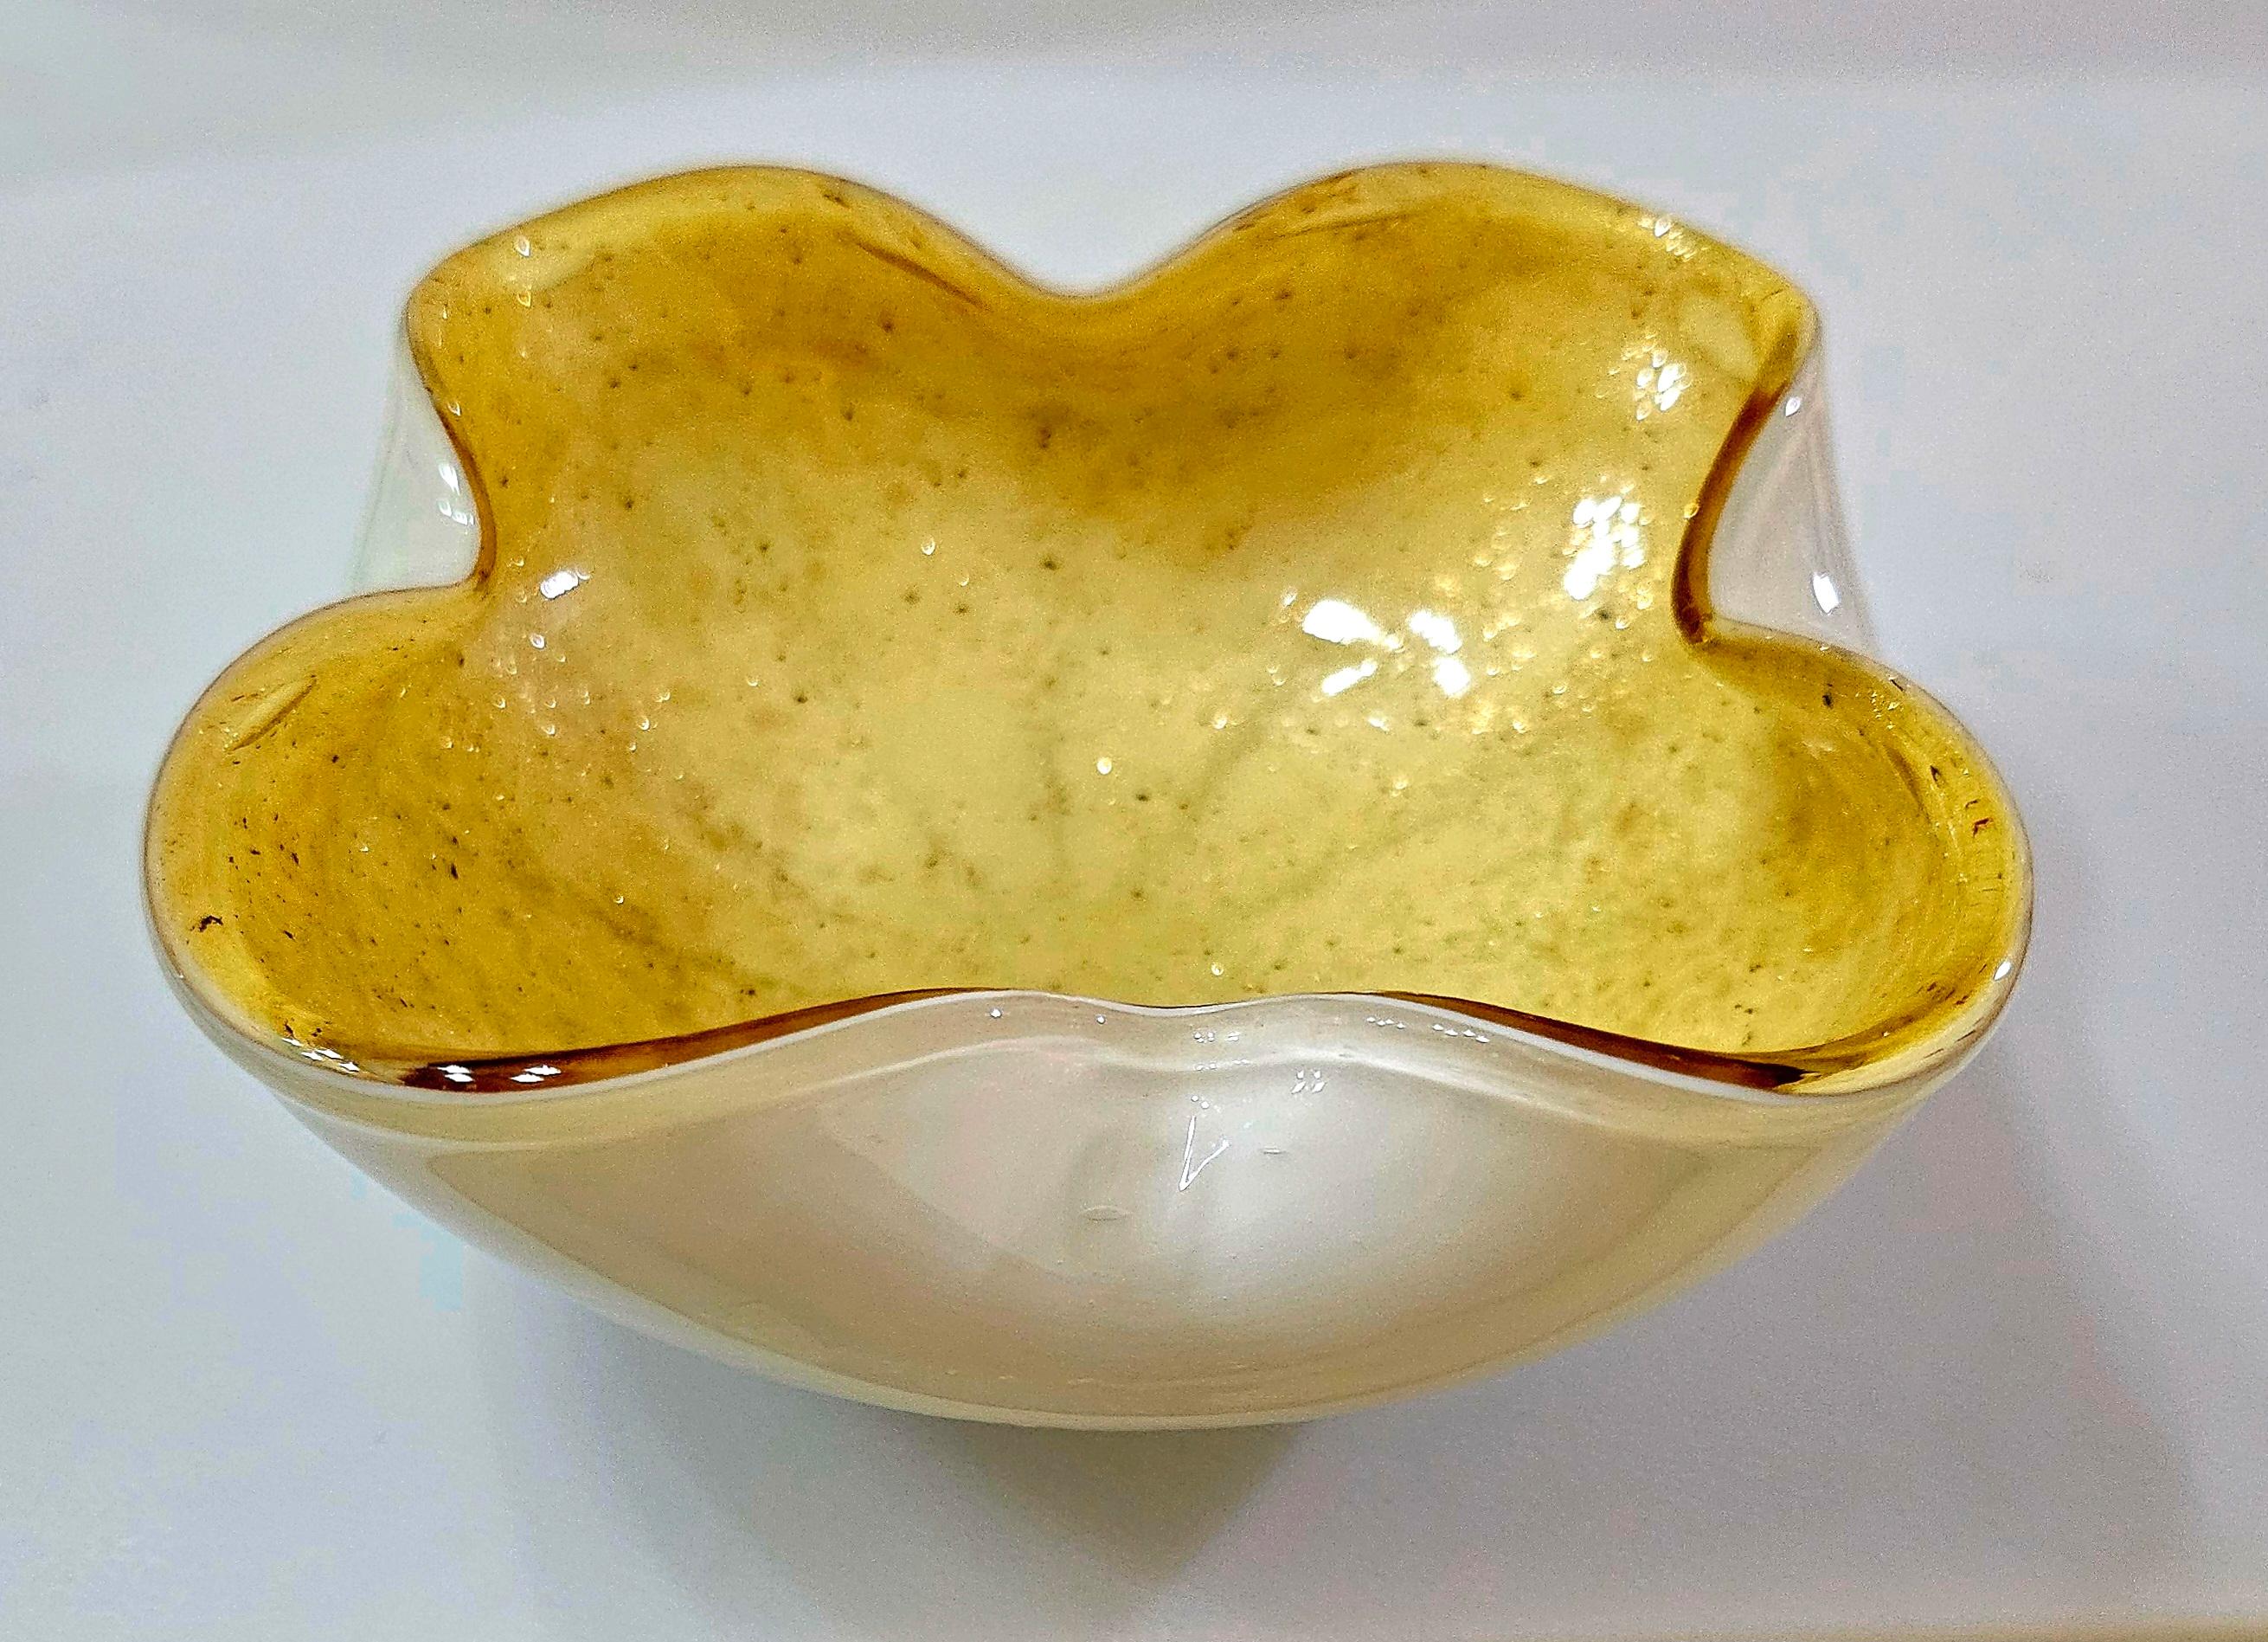 Vintage Murano Glass Bowl / Dish / Ashtray / Vide Poche
There are fine gold specks on the inside that seem to 'glitter' on movement.
Approximately 5.5 x 2 inches.
Measurements are approximate. Please be aware that the color on your monitor and/or in